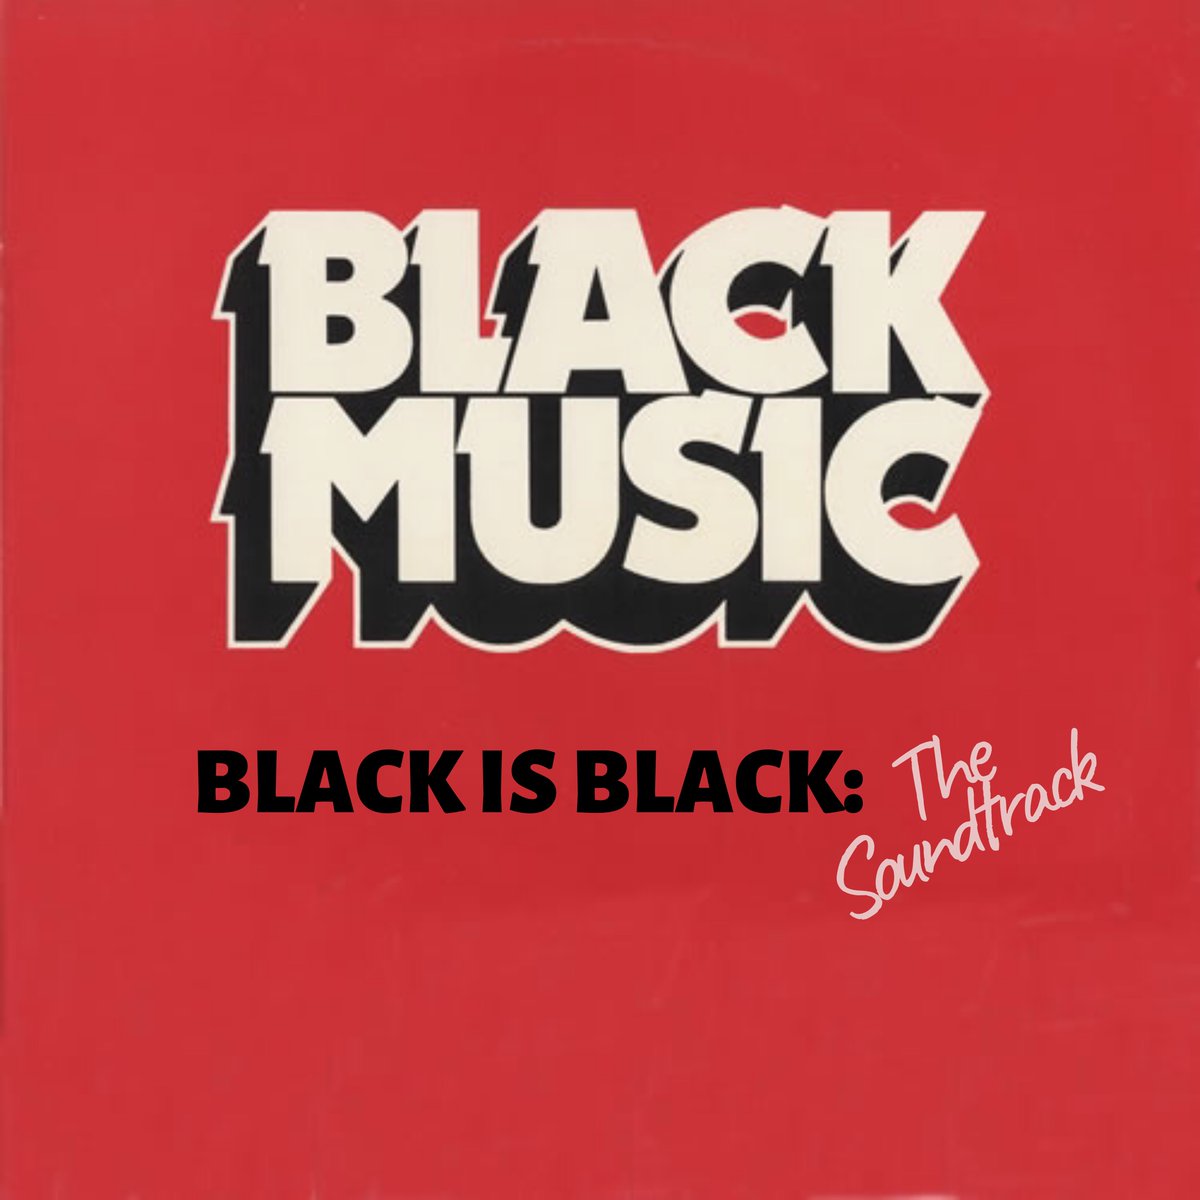 And if you need a soundtrack for today, I offer you the playlist of last year's "BLACKEST song you can think of" answers: Black is Black: The Soundtrack. Find both Spotify and Apple Music lists on the link.  http://smarturl.it/tar4sk 